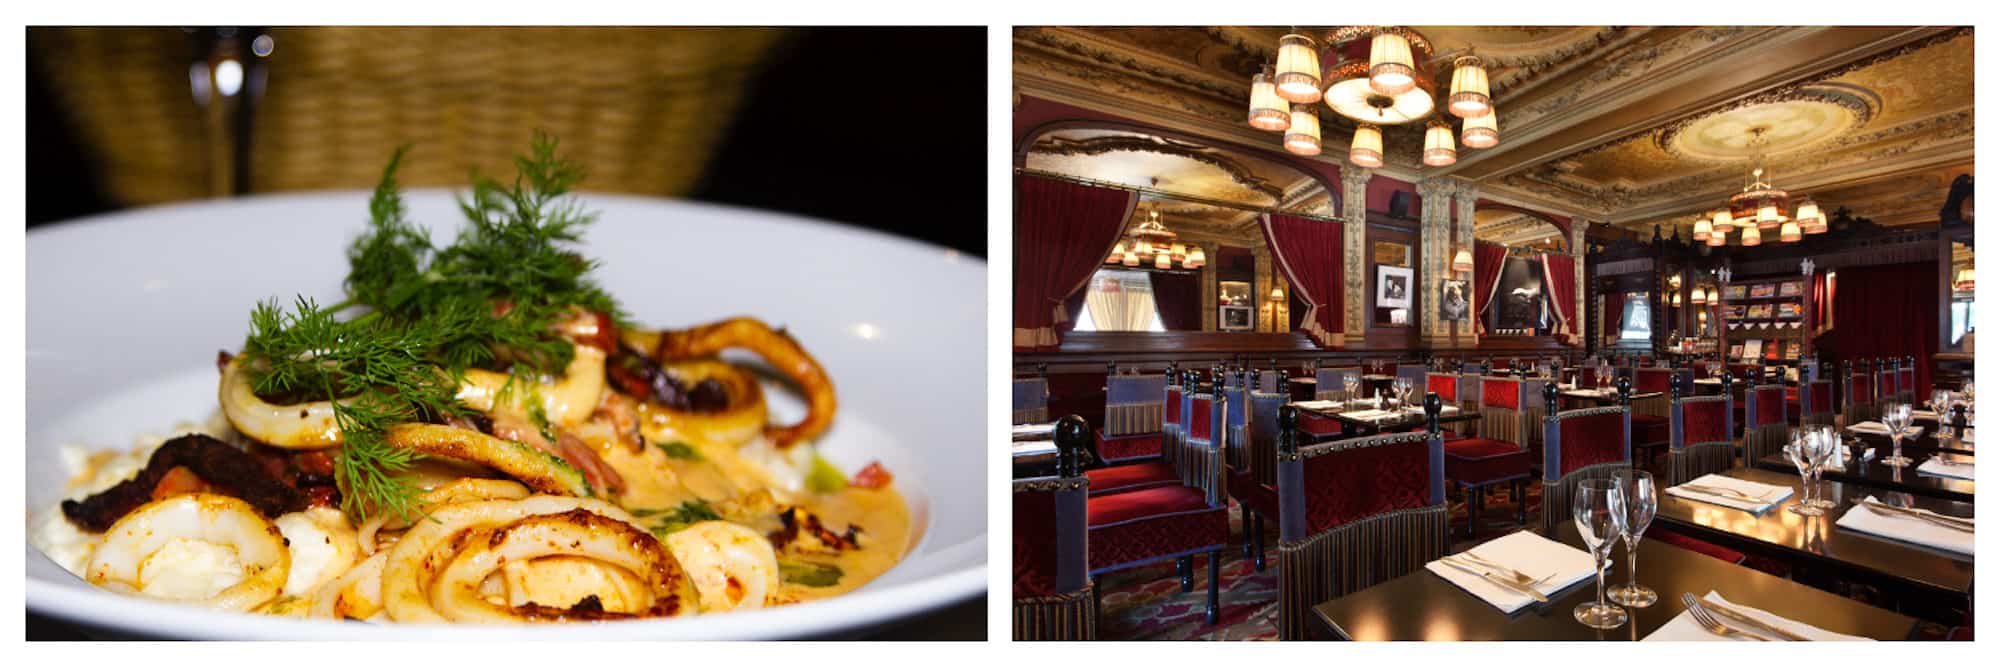 Top place to eat in Paris for its Alsatian-inspired fare, Brasserie Zimmer is on the Place du Châtelet in Paris' 1st district and serves seafood like grilled octopus (left) and has old-world wooden and red velvet interiors (right).